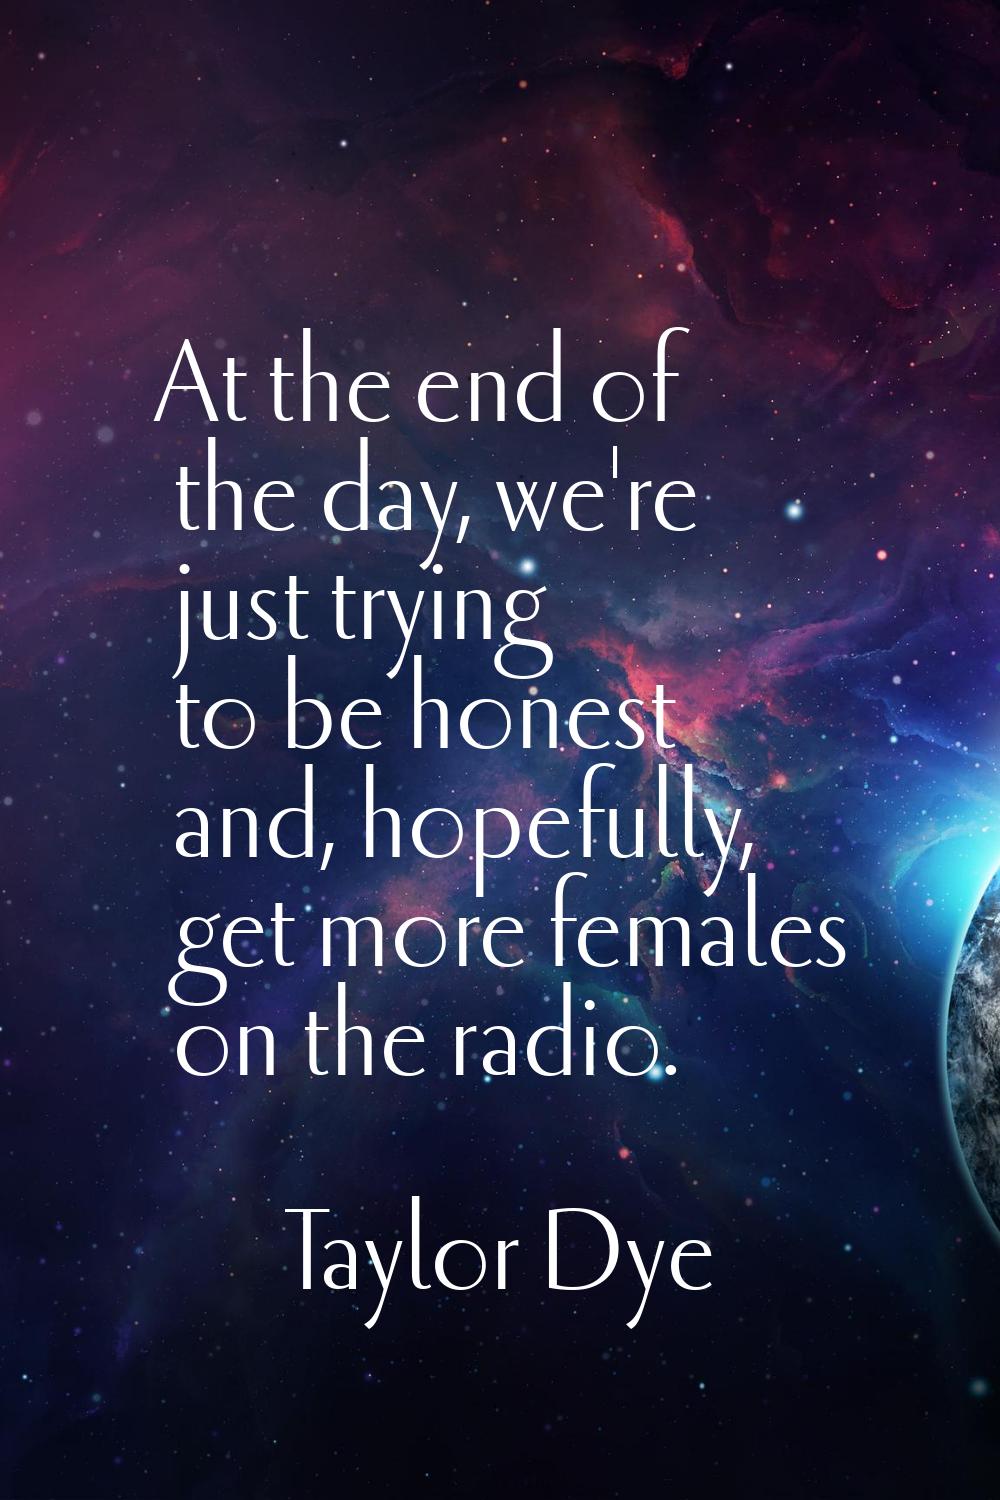 At the end of the day, we're just trying to be honest and, hopefully, get more females on the radio